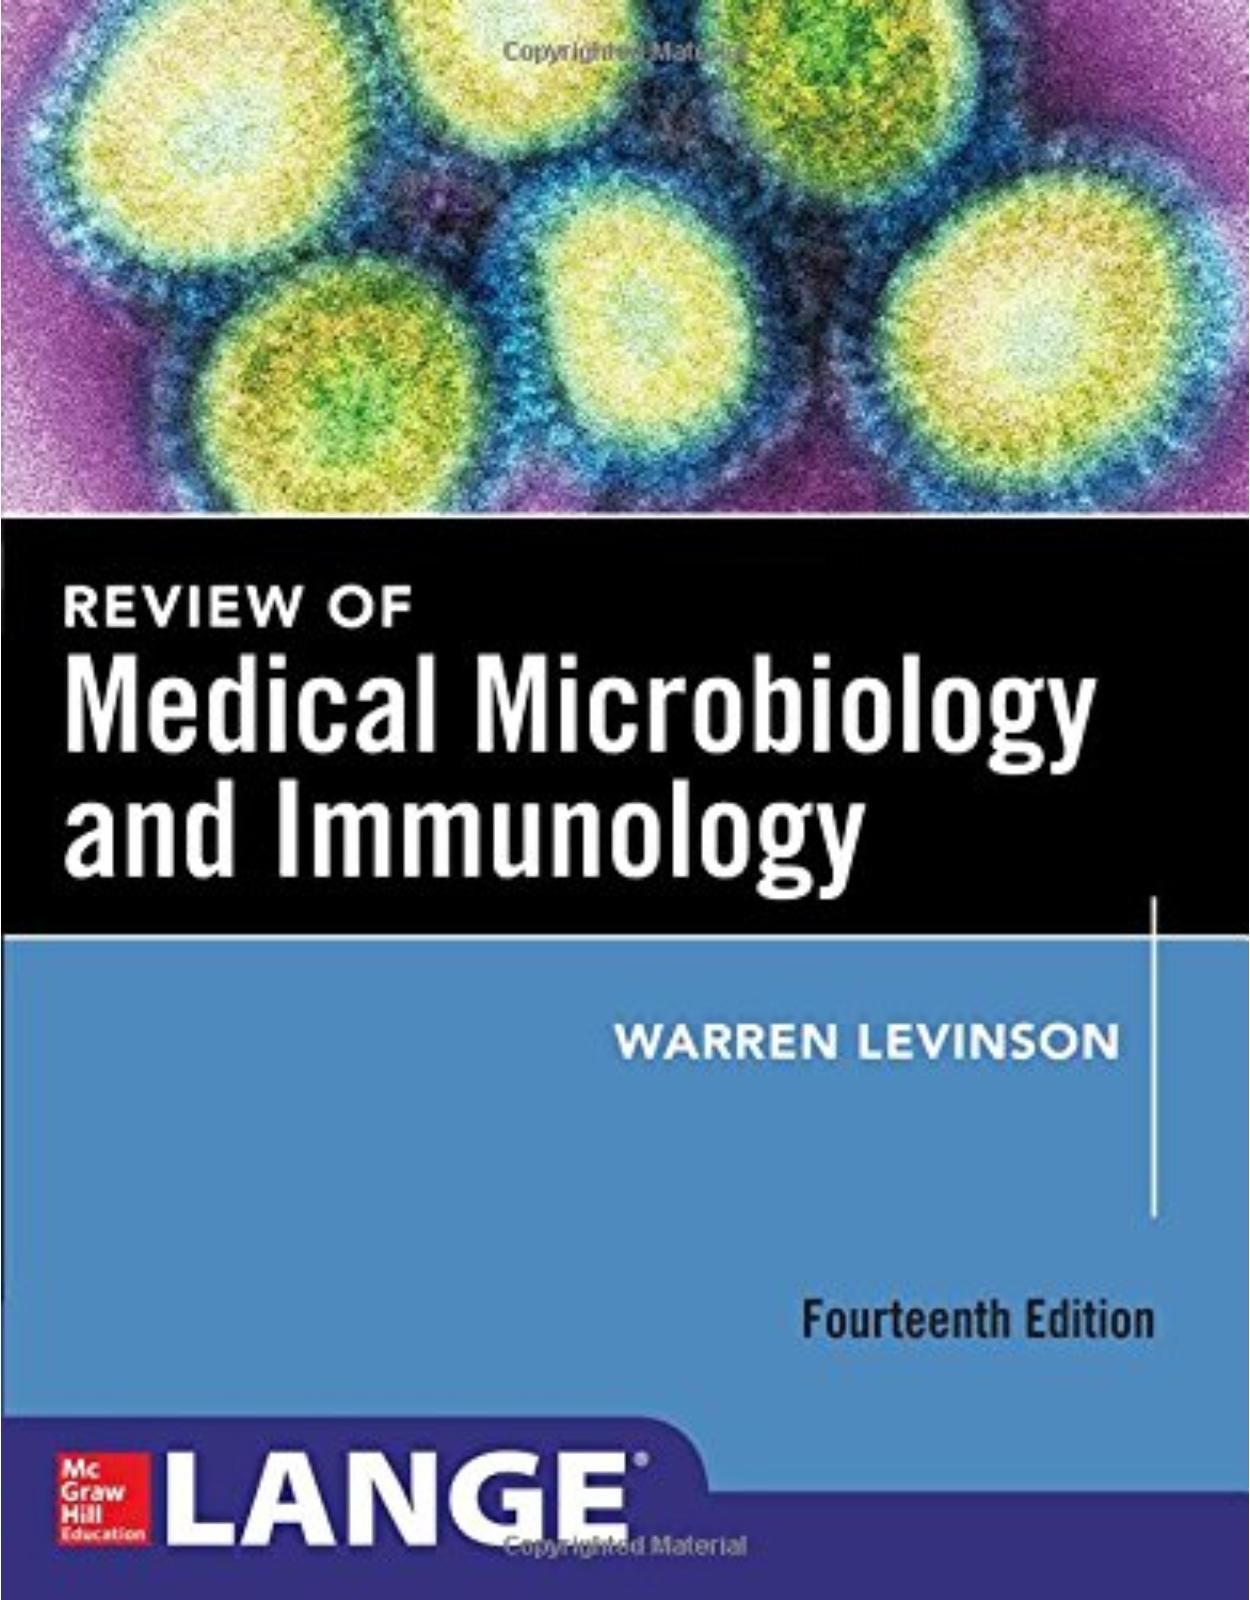 Review of Medical Microbiology and Immunology, Fourteenth Edition (Lange) 